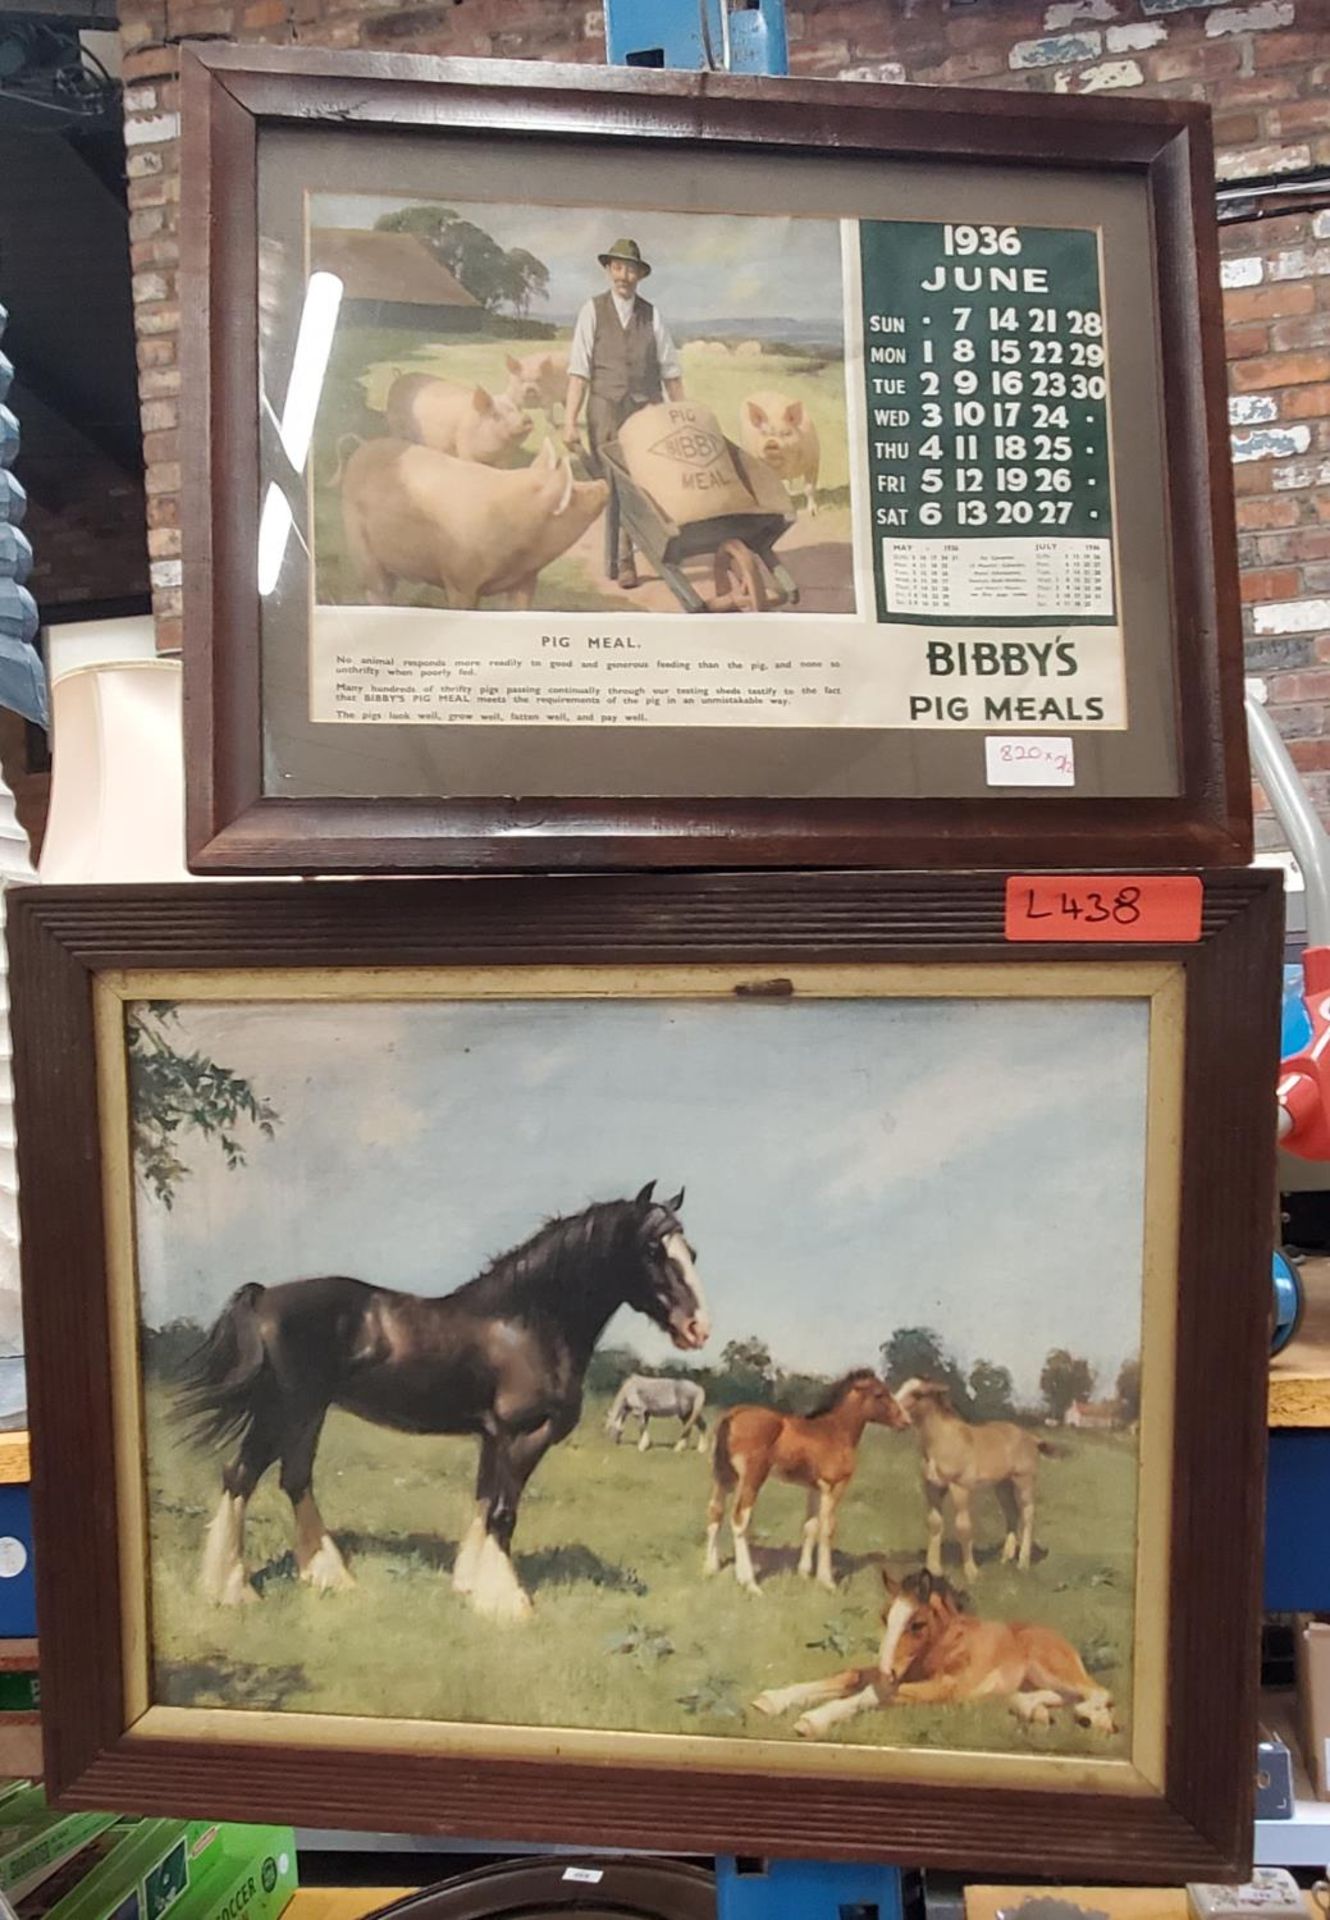 A VINTAGE FRAMED JUNE 1936 CALENDAR PAGE ADVERTISING BIBBY'S PIG MEALS PLUS A PRINT OF A SHIRE HORSE